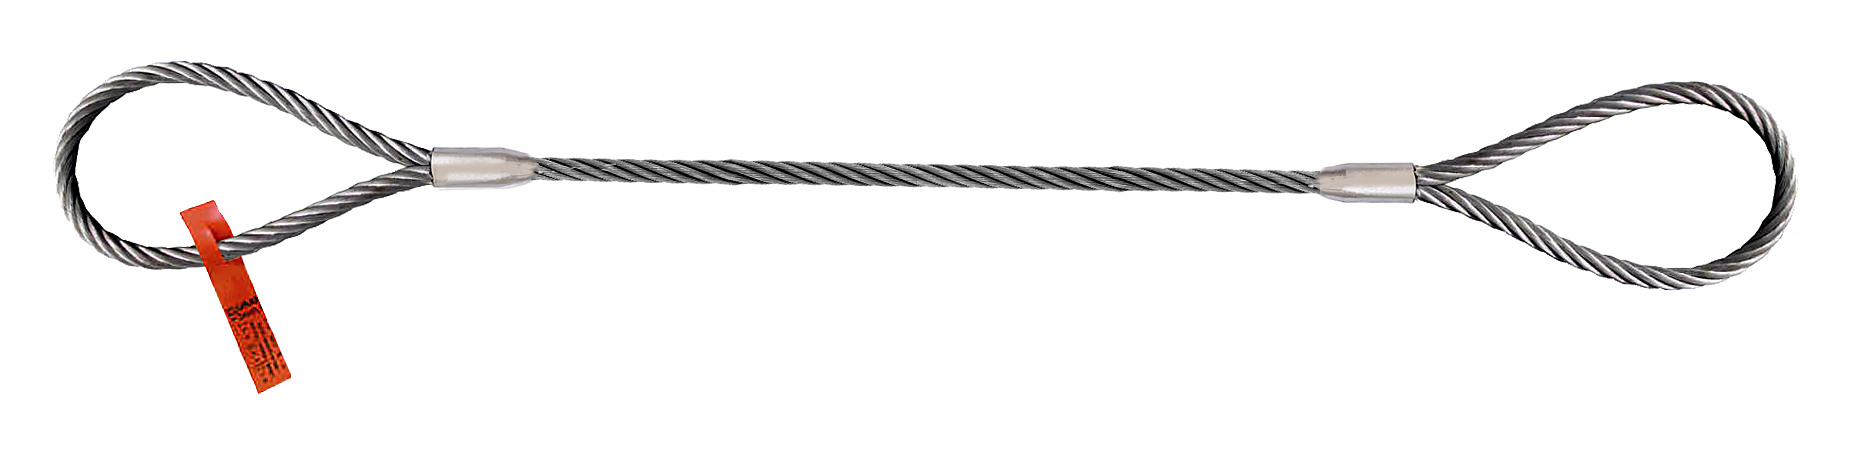 19600 lb Wire Rope 14 Length Liftall 1IEEX14 Sling Vertical